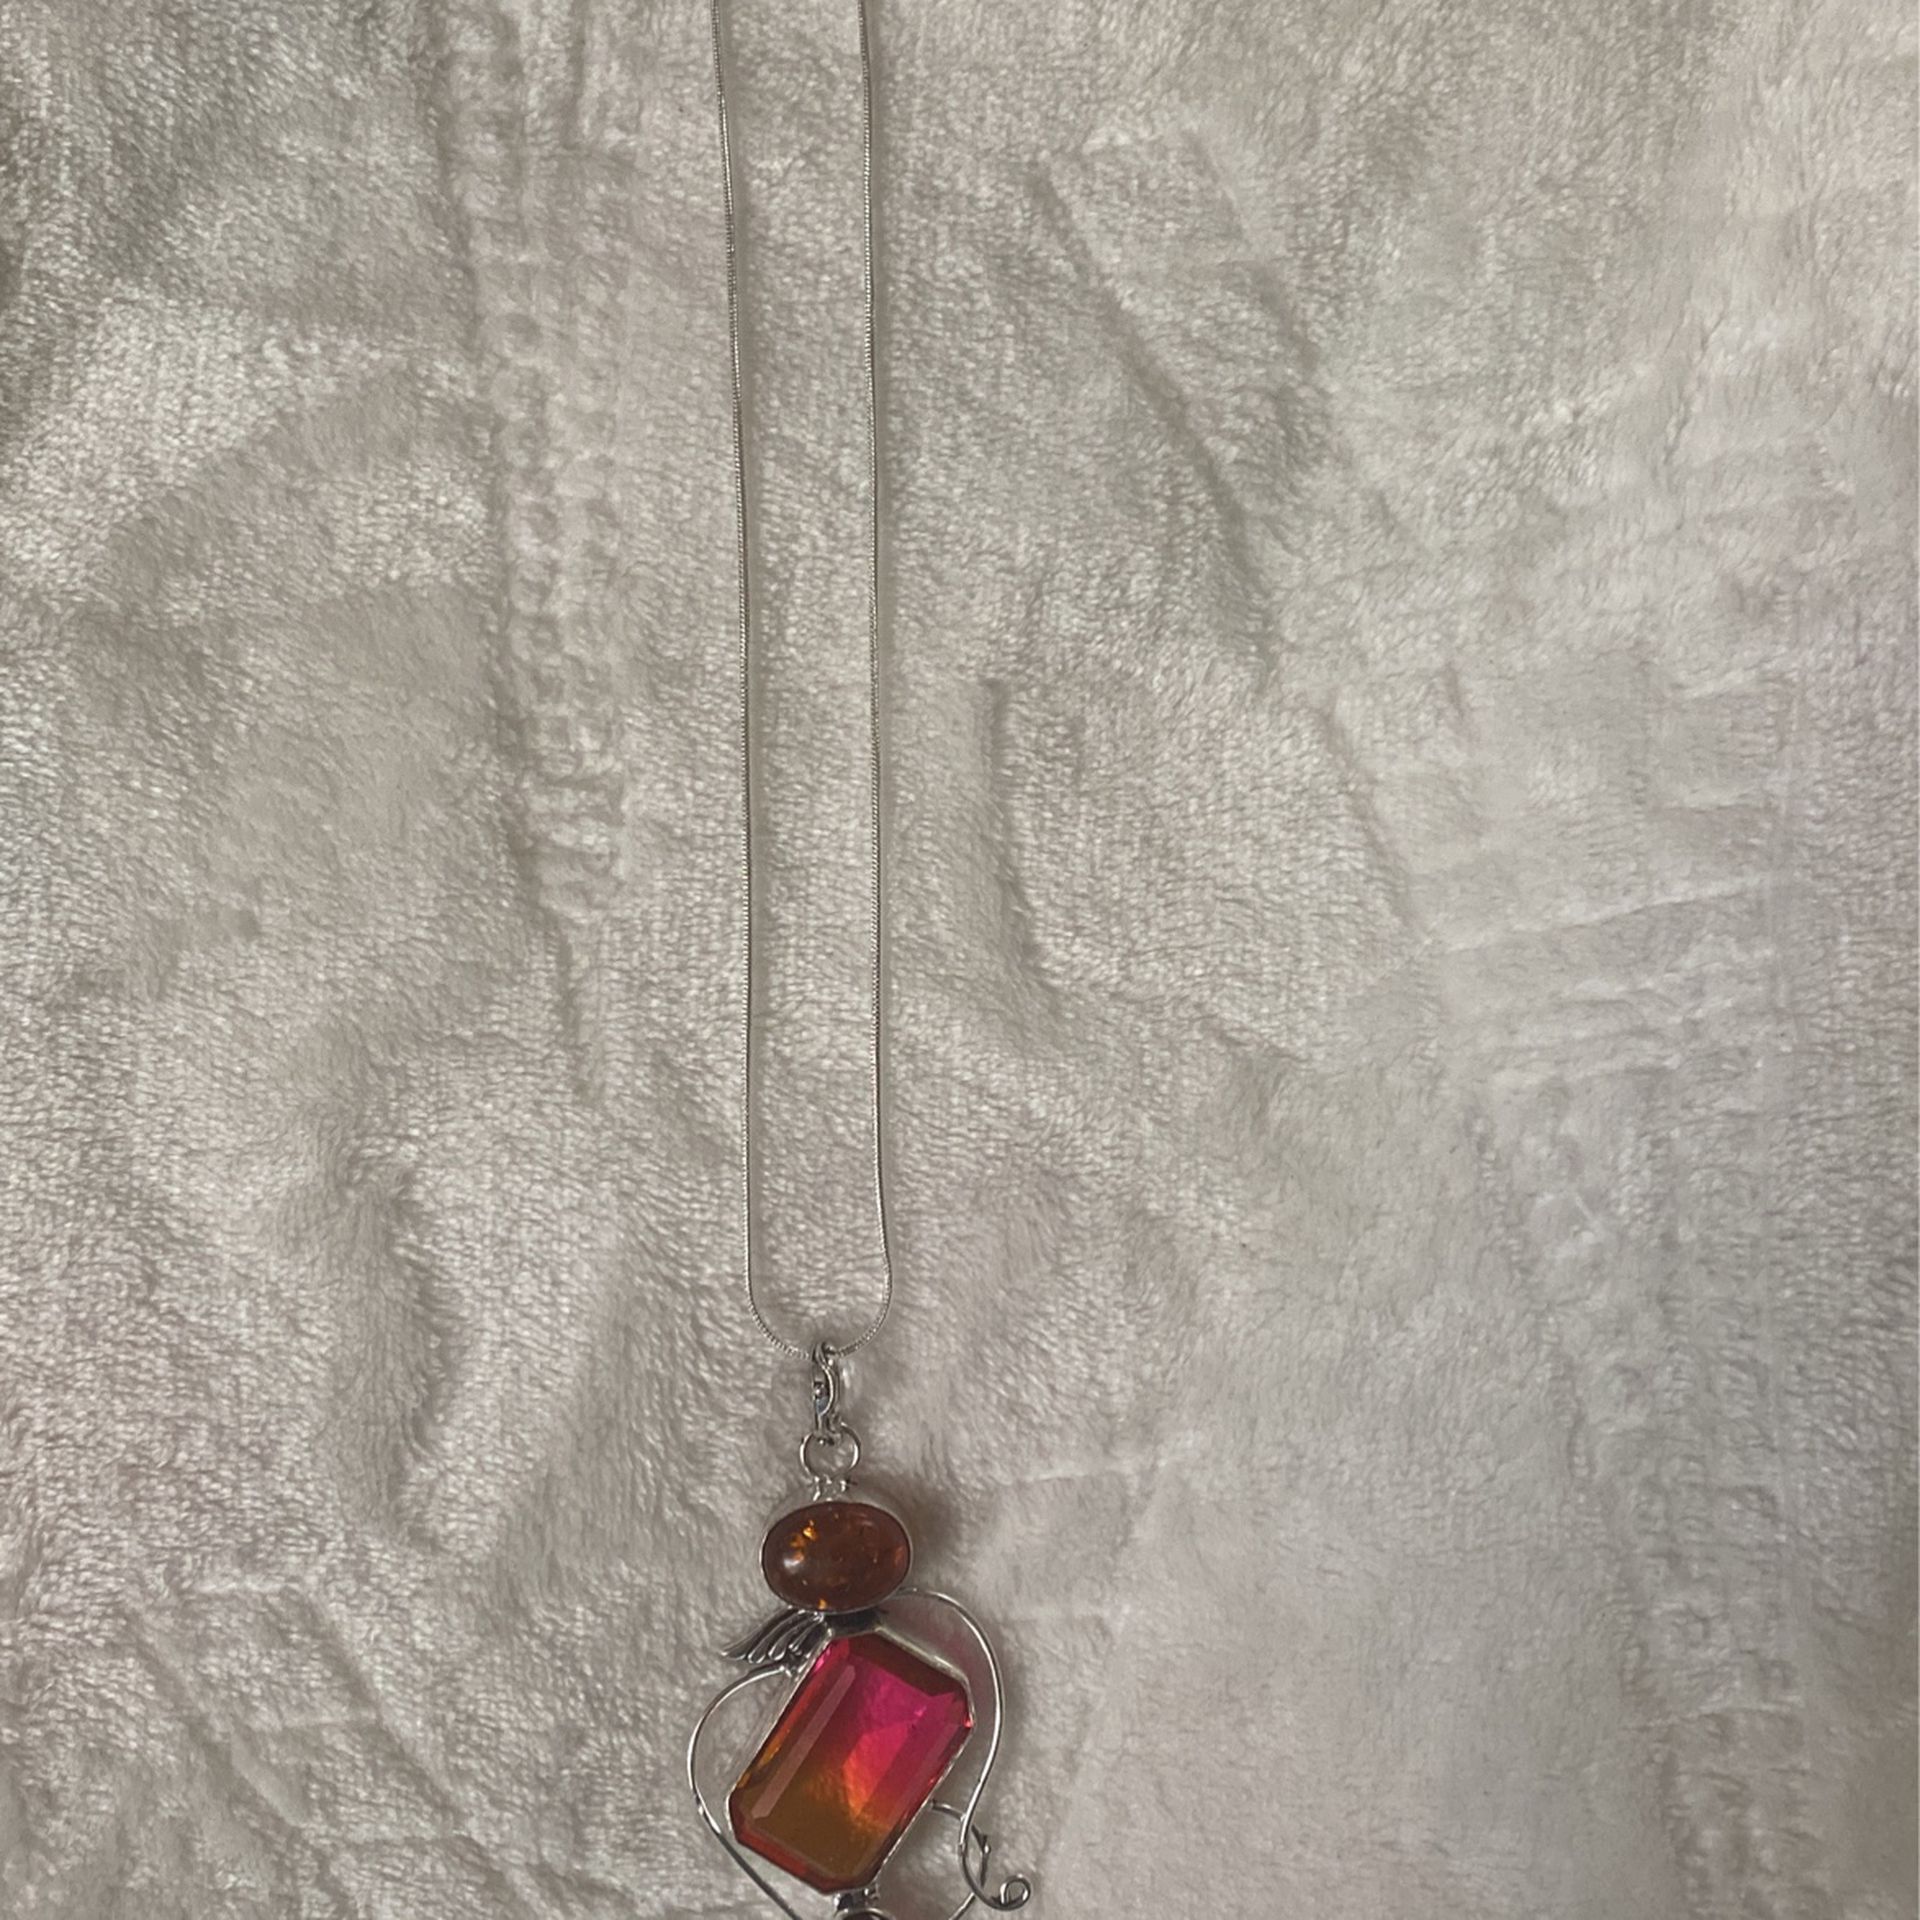 Rainbow Topaz Baltic Amber With Garnet  Necklace All Sterling Silver Comes With Sterling Silver Chain  